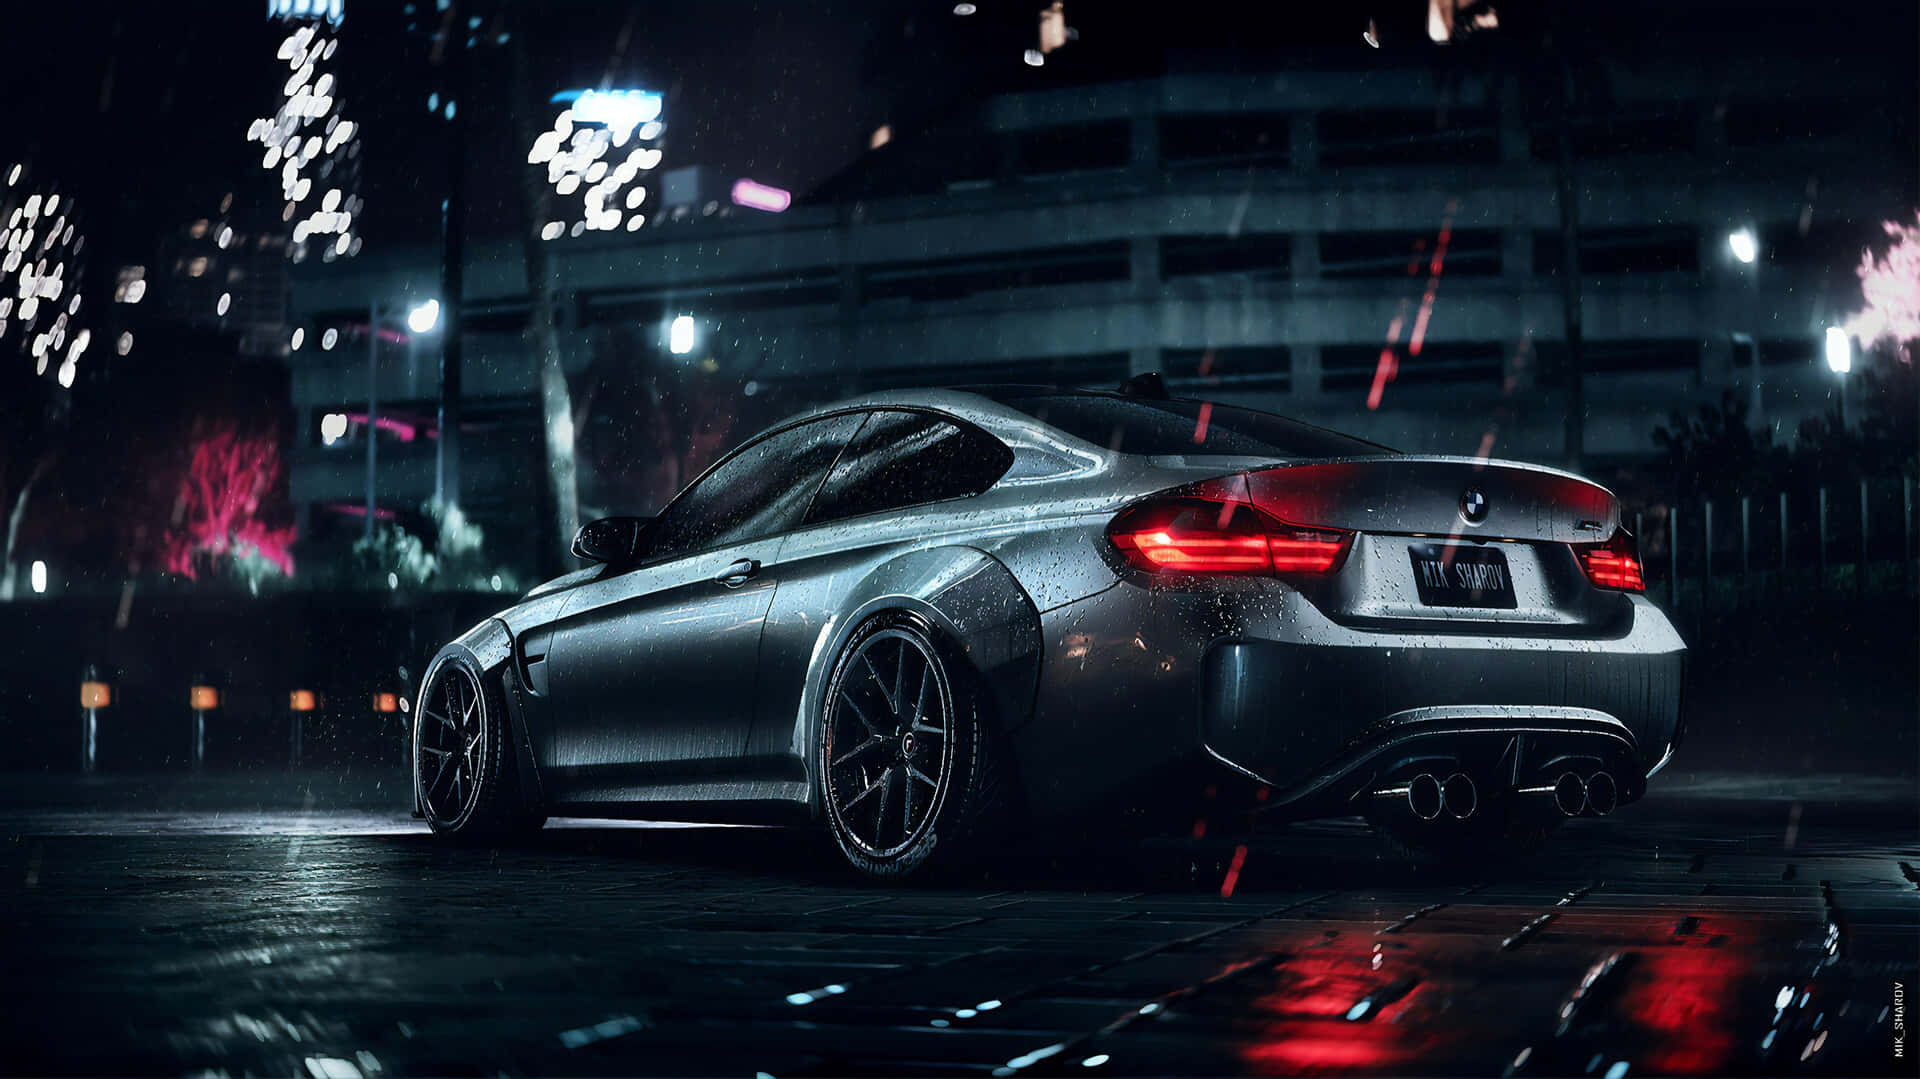 Rev up Your Engines for an Epic NFS Race Wallpaper